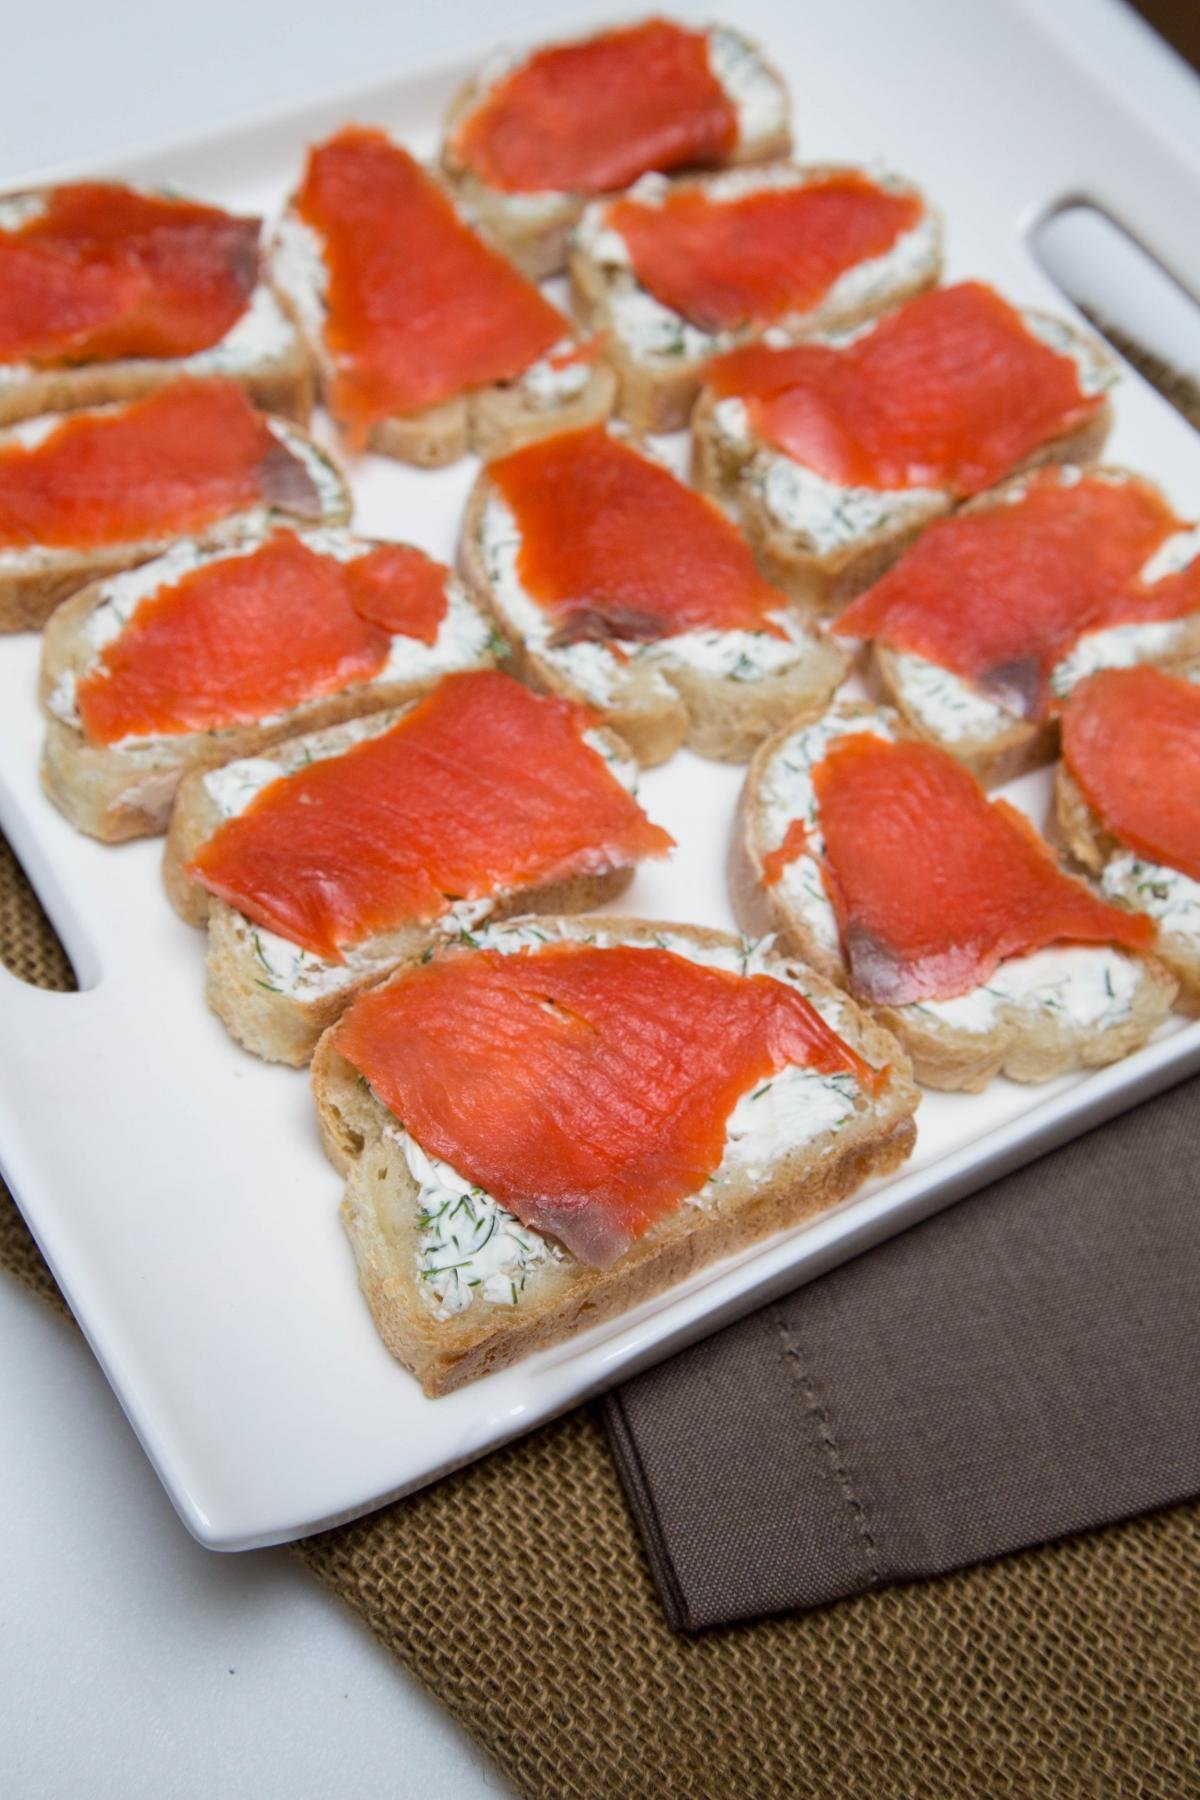 HOW TO MAKE SALMON SPREAD FOR SANDWICHES